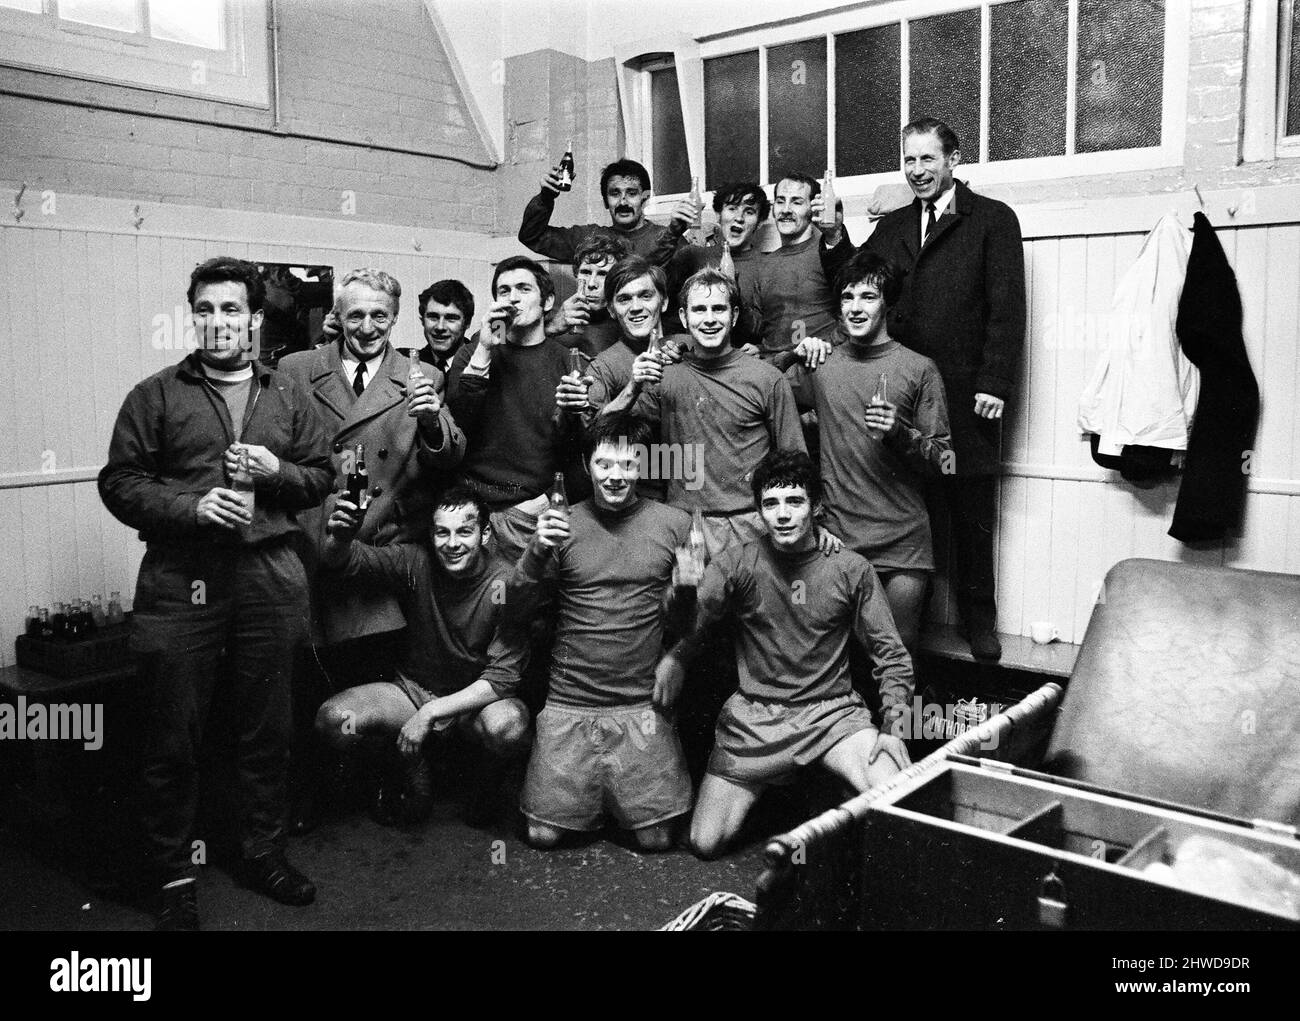 Sheffield Wednesday v Scunthorpe United FA Cup fourth round match at Hillsborough January 1970.   Celebrations in Scunthorpe dressing room with winning goal scorer at back (arm raised in salute)     Final score:  Sheffield Wednesday 1-2 Scunthorpe United Stock Photo